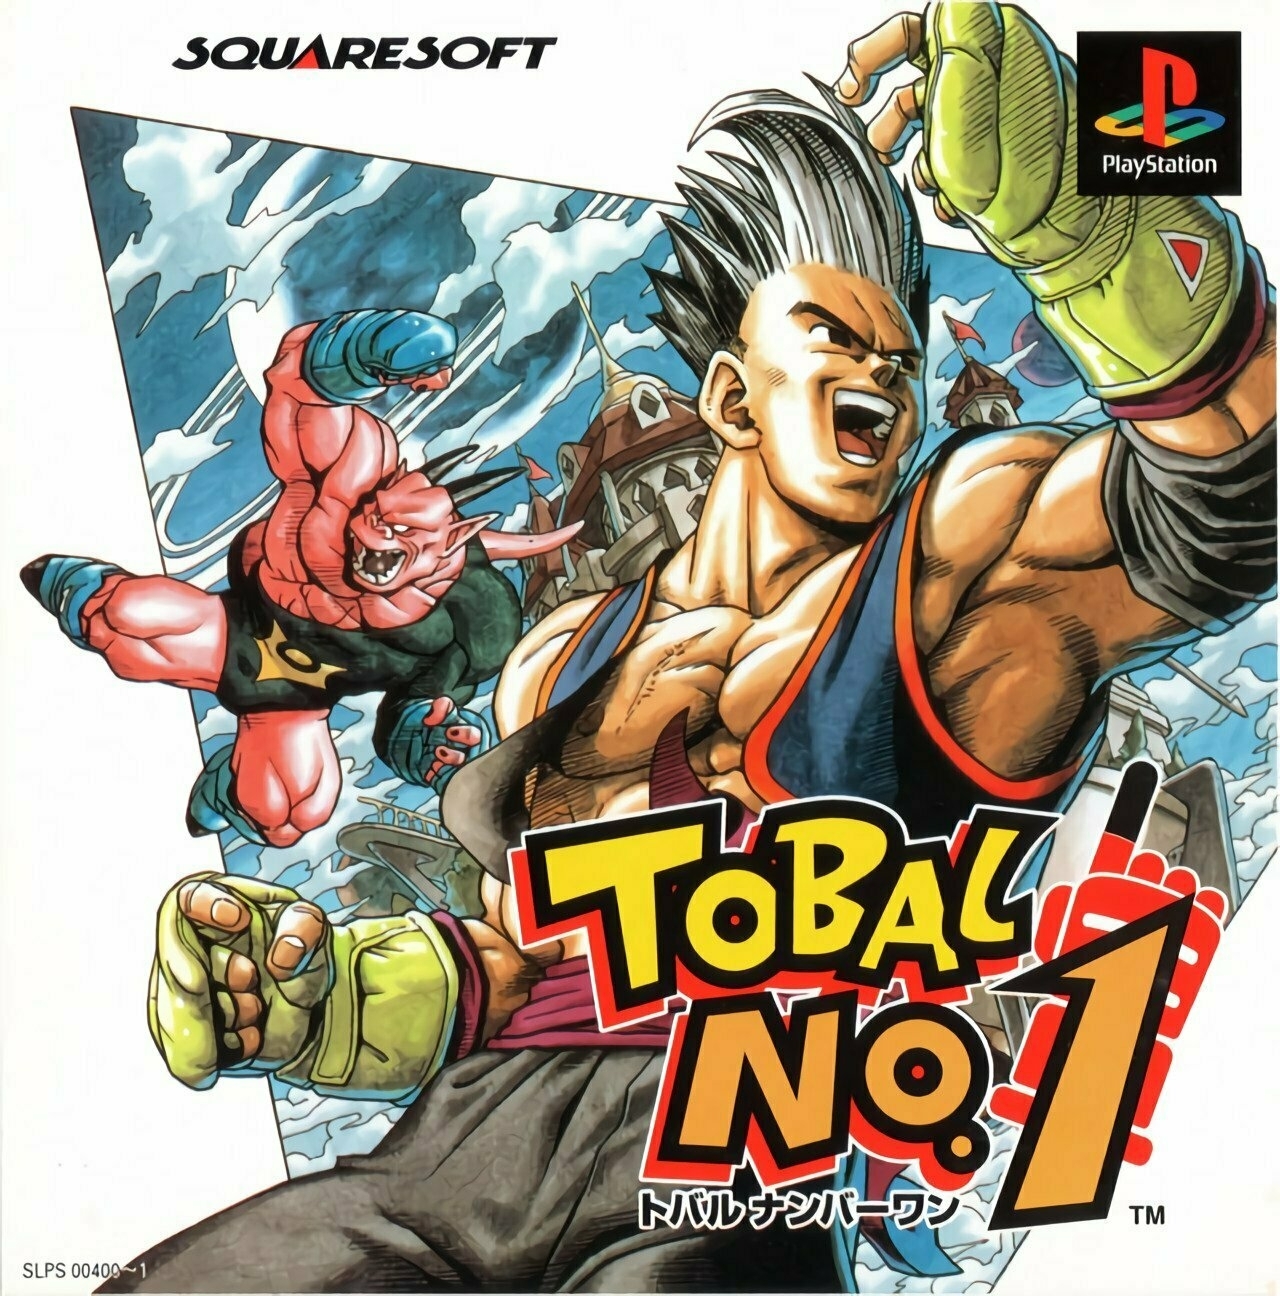 Cover art for the Japanese release of Tobal No. 1 for the PlayStation.